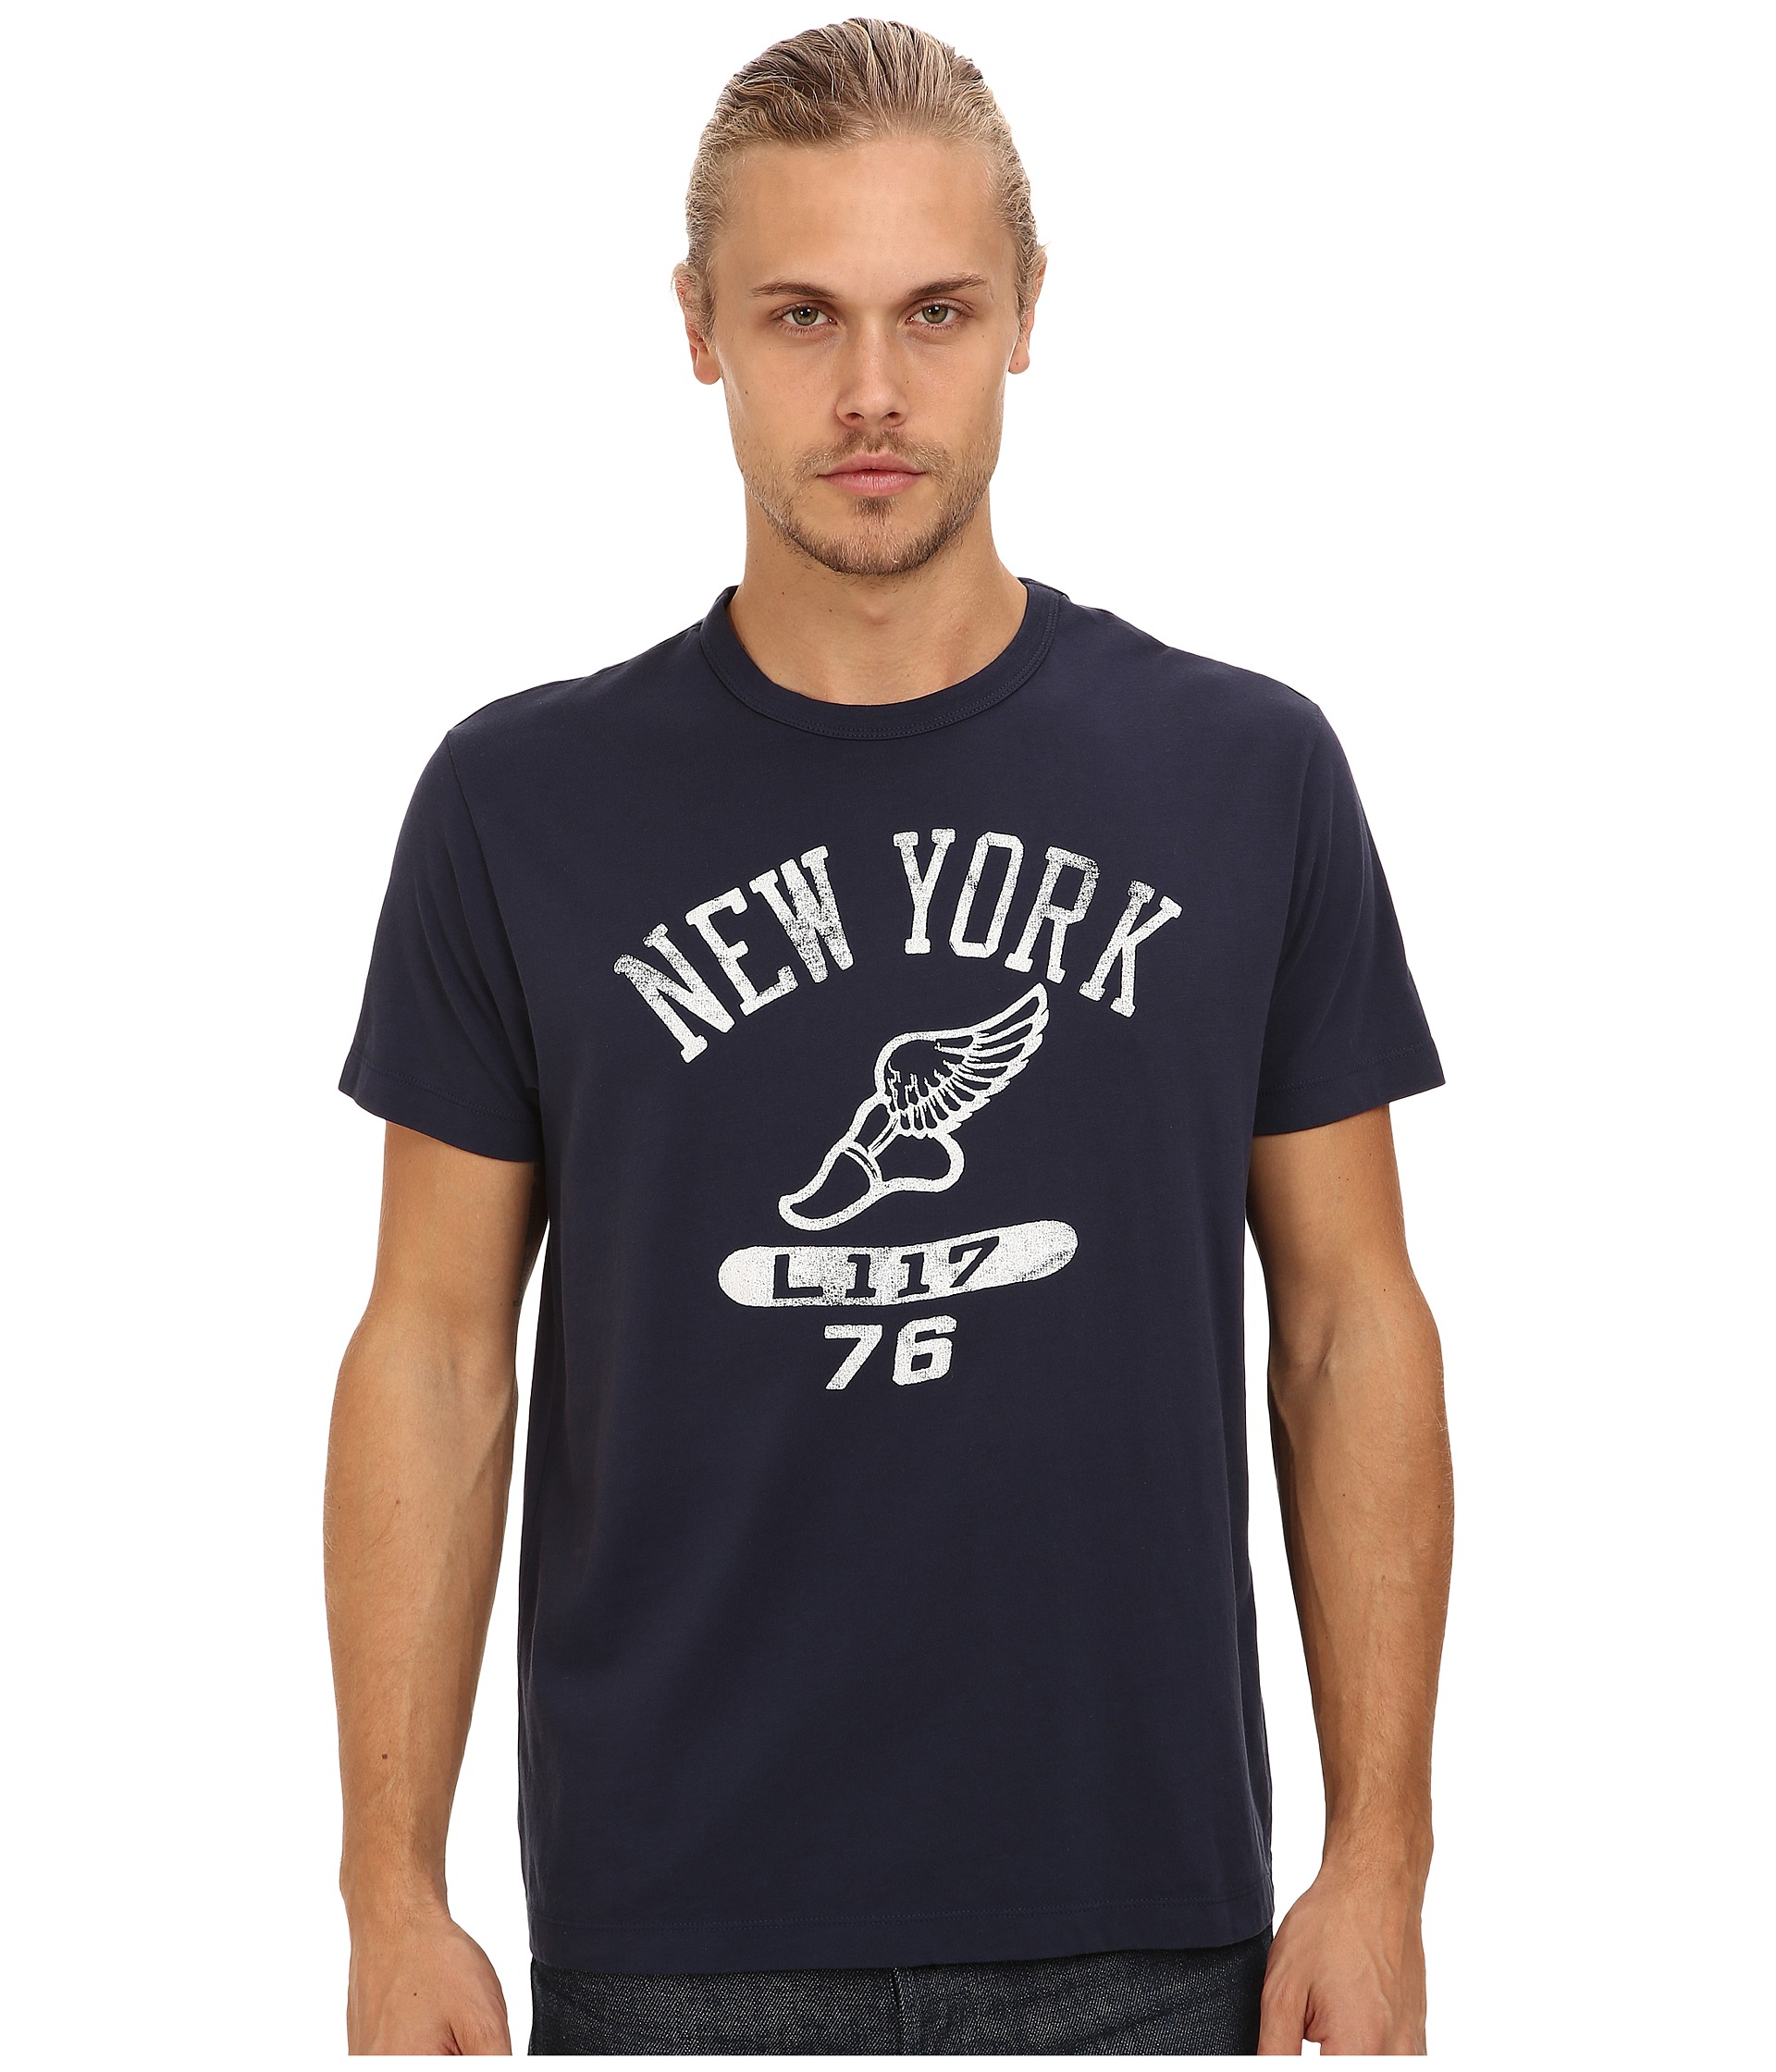 Tailgate Clothing Co New York Winged Foot Tee | Shipped Free at Zappos